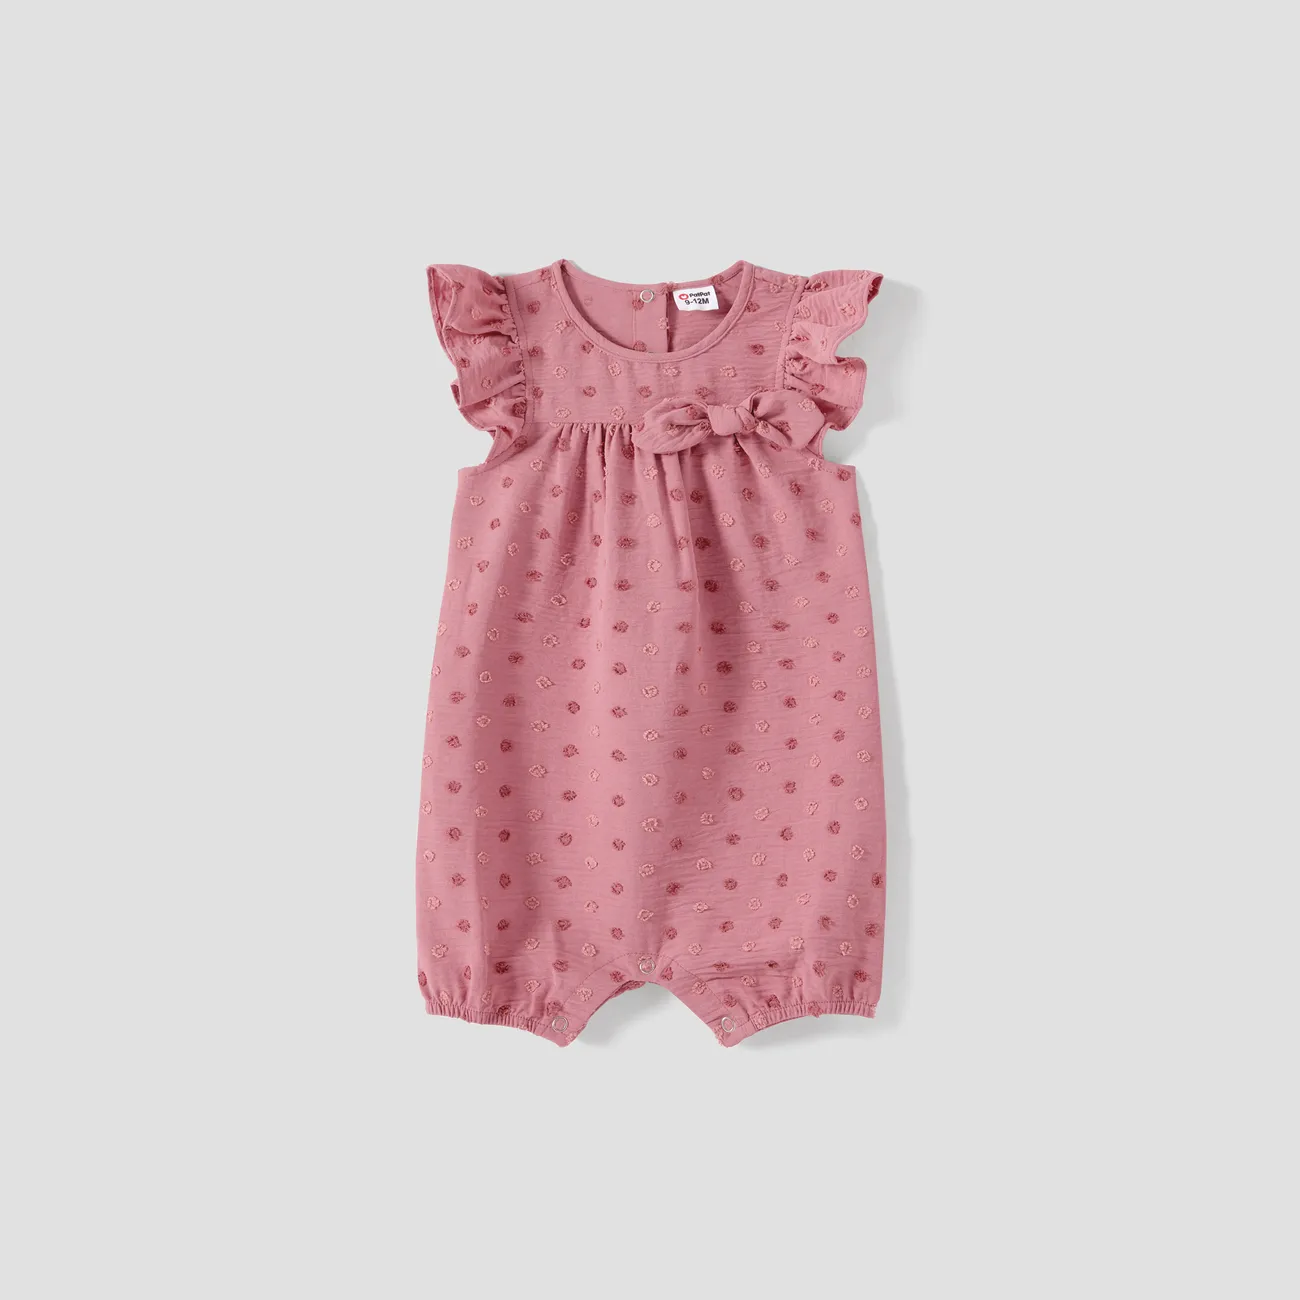 Family Matching Swiss Dot Belted Dresses and Two Tone Short-sleeve T-shirts Sets Pink big image 1